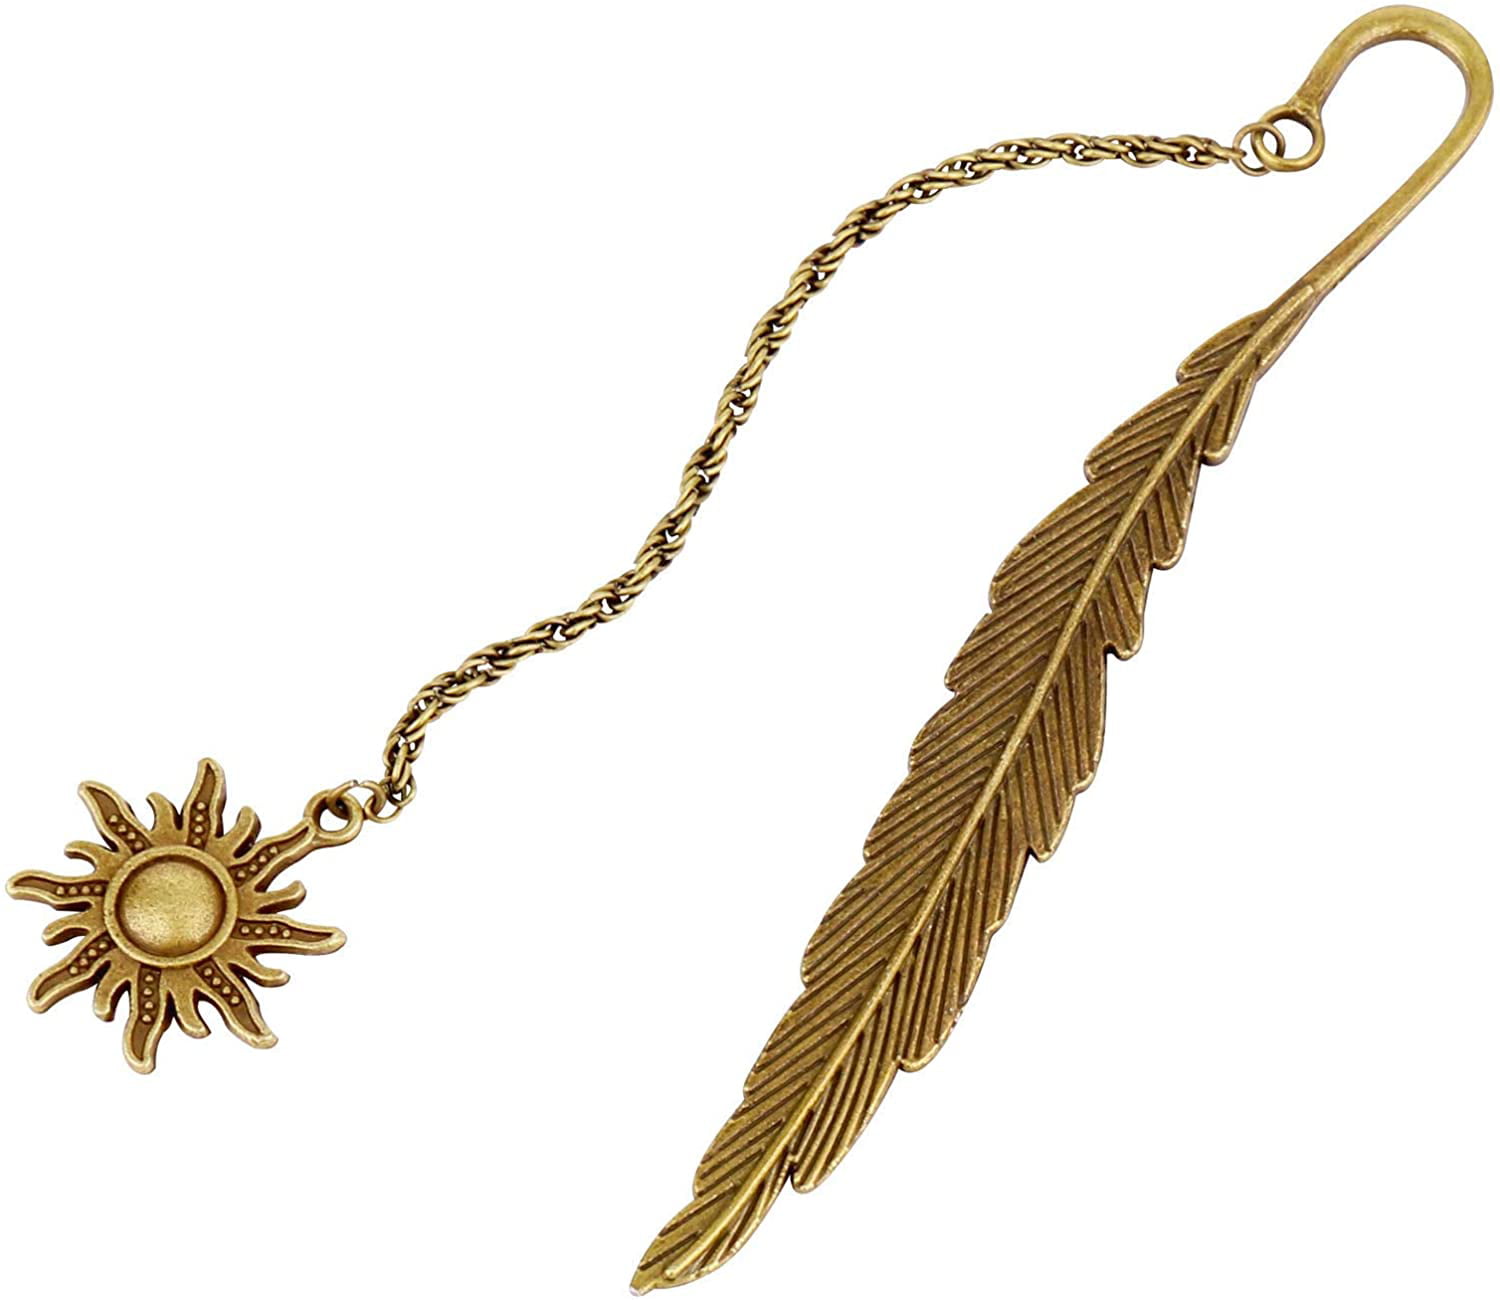 Phoenix-1 Chinese Style Bookmark THE WORLDS FIRST Metal Material with Tassels for Women Kids as Gift School Office Supplies